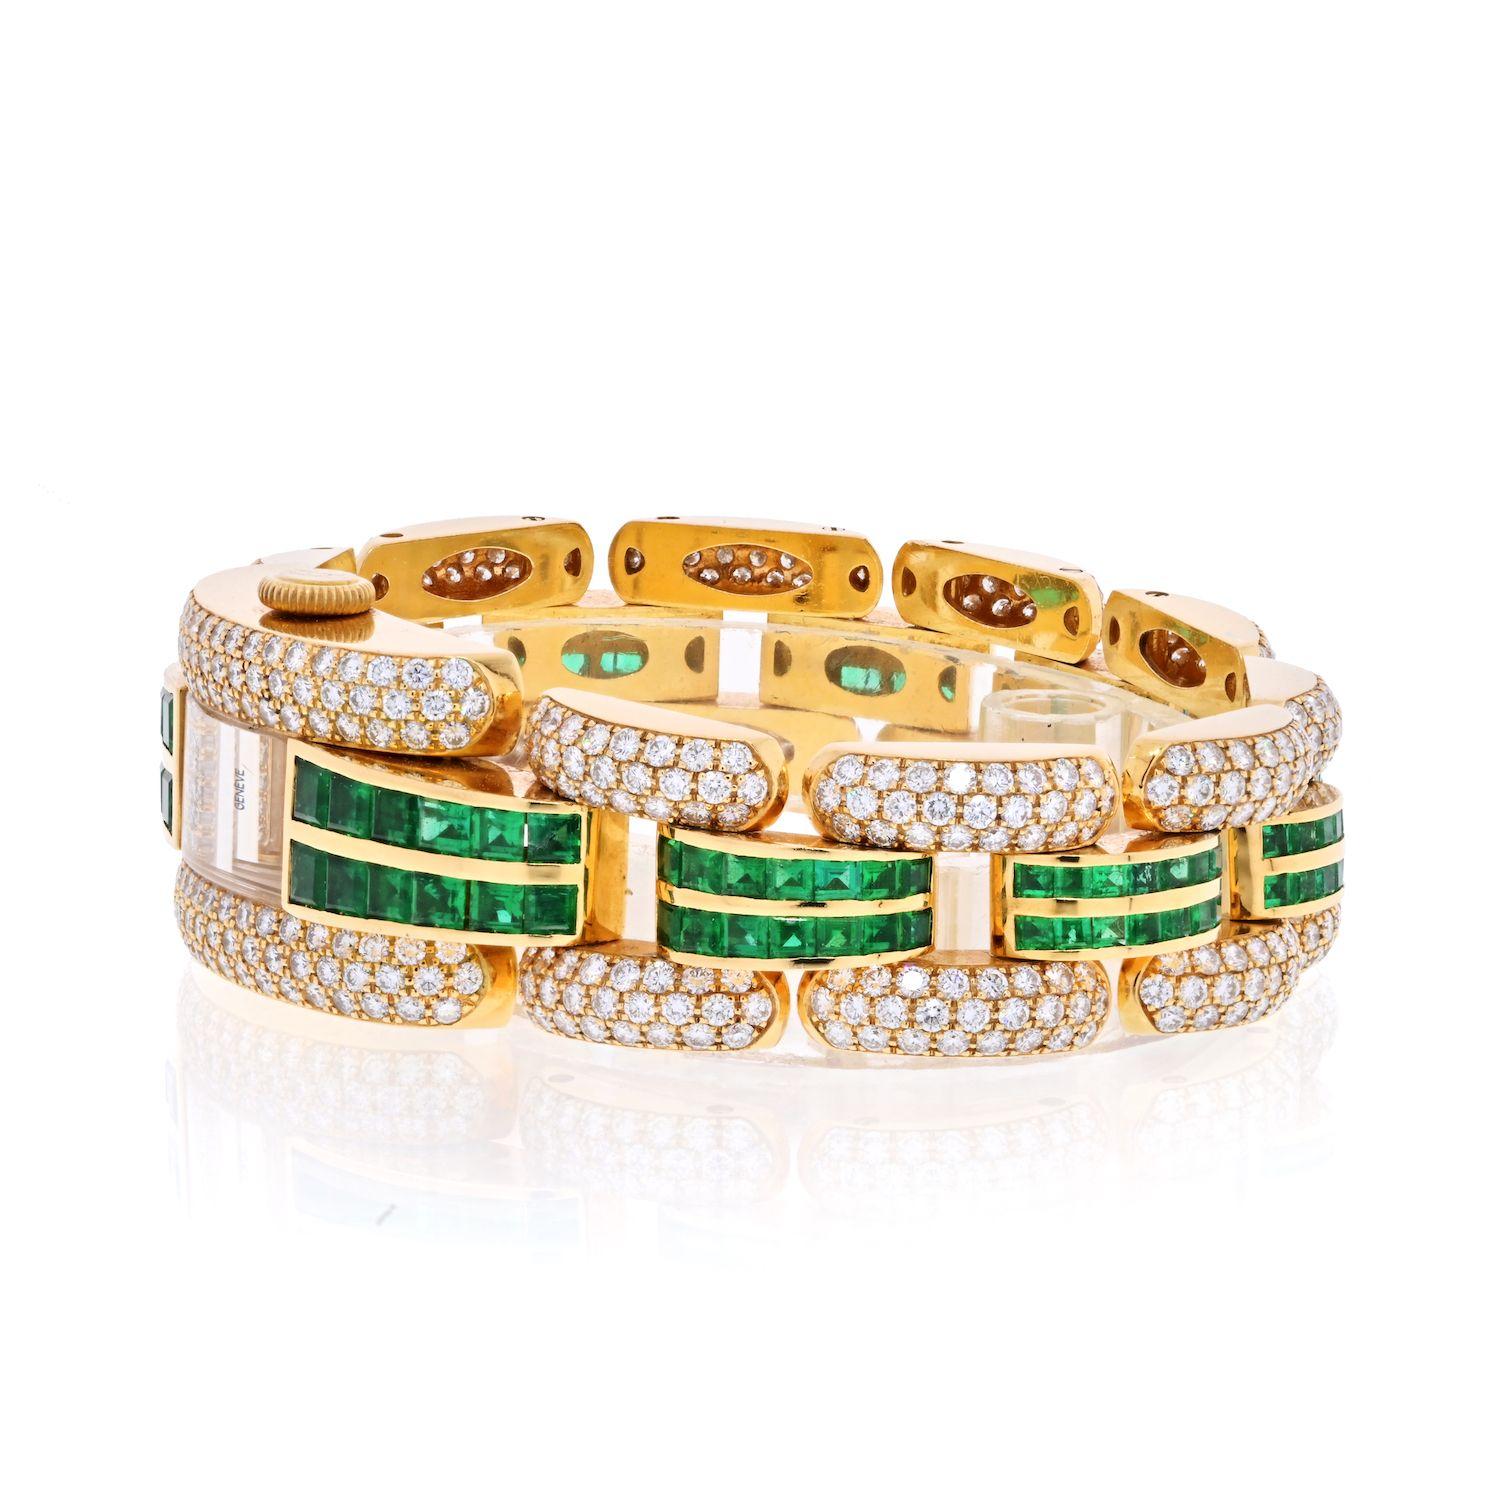 Chopard 18K Yellow Gold La Strada Diamond And Green Emerald Ladies Wrist Watch.
Dial: pavé-set 
Calibre: mechanical, jeweled
Case: 18k yellow gold, case back secured by 4 screws
Case number: 475241
Closure: 18k yellow gold bracelet and clasp, wrist